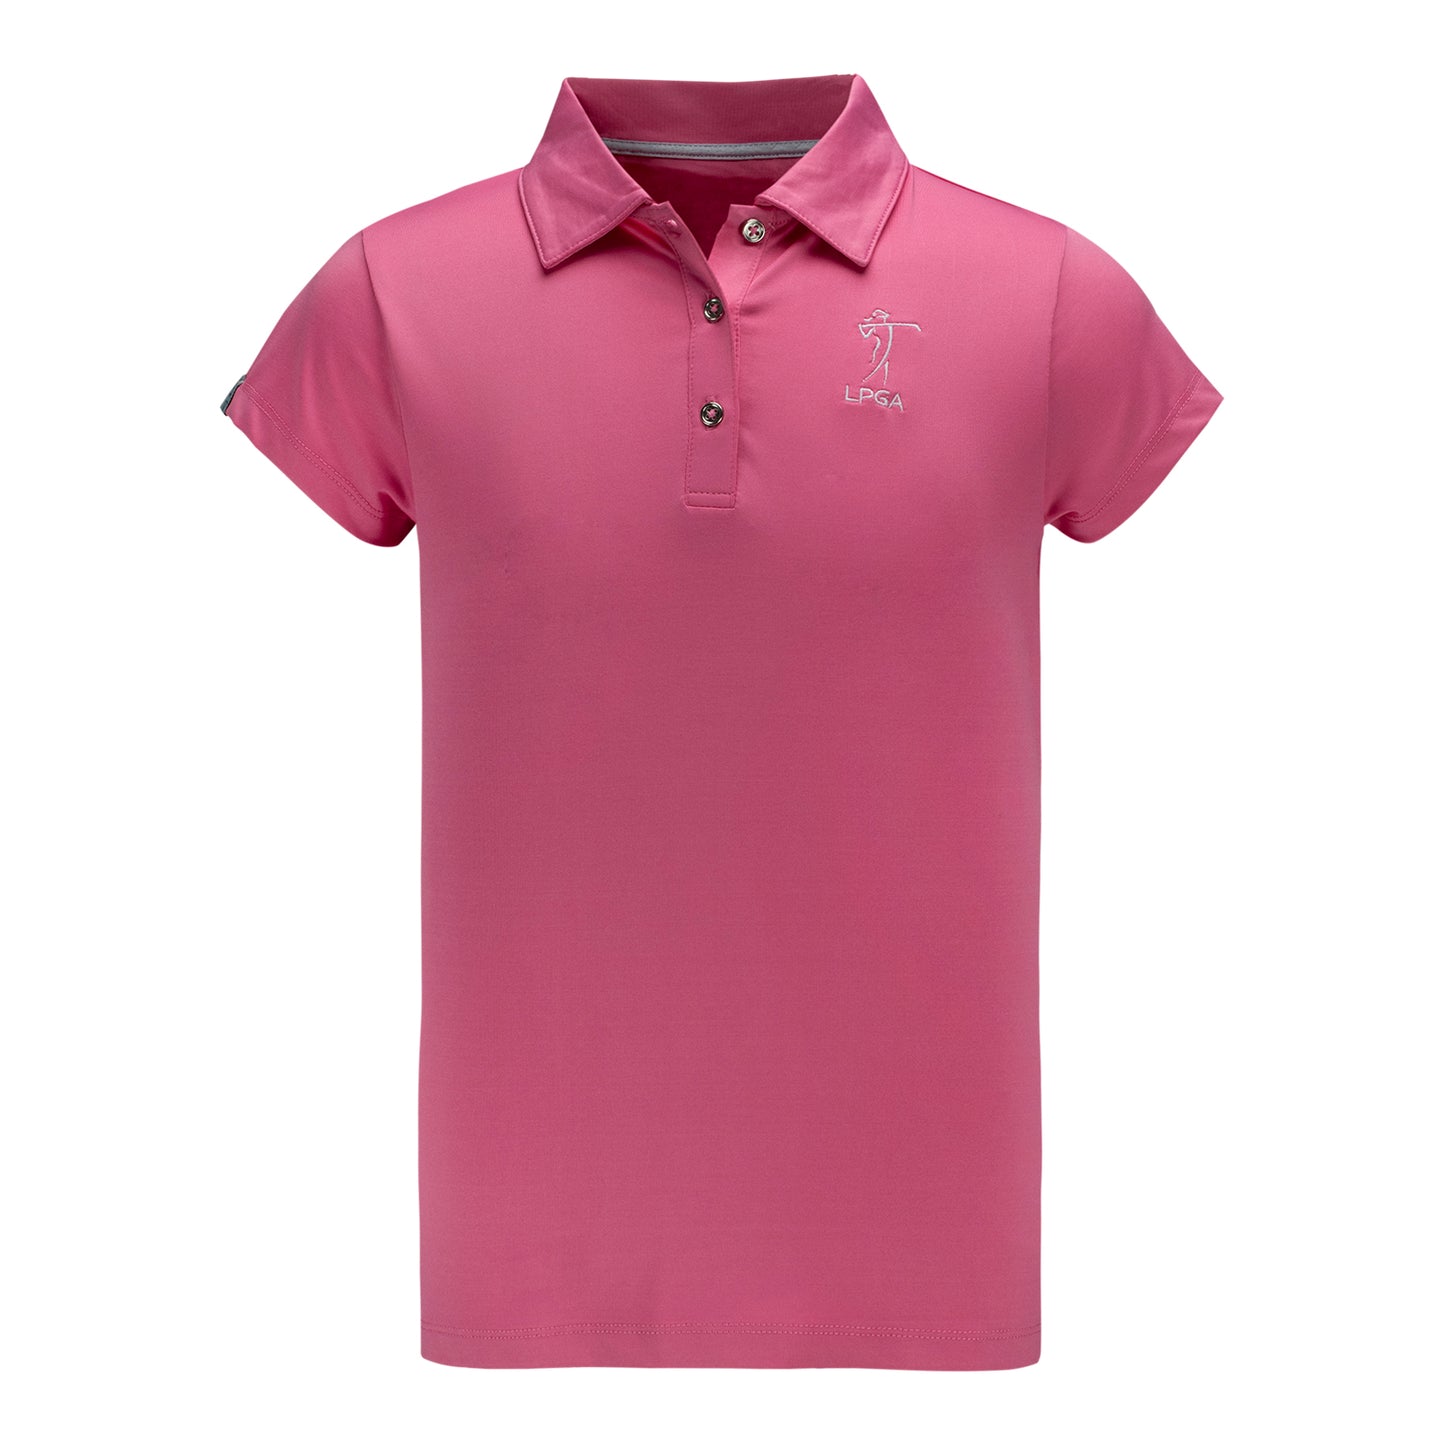 Garb 2023 LPGA Brighton Girls Youth Polo in Pink - Front View